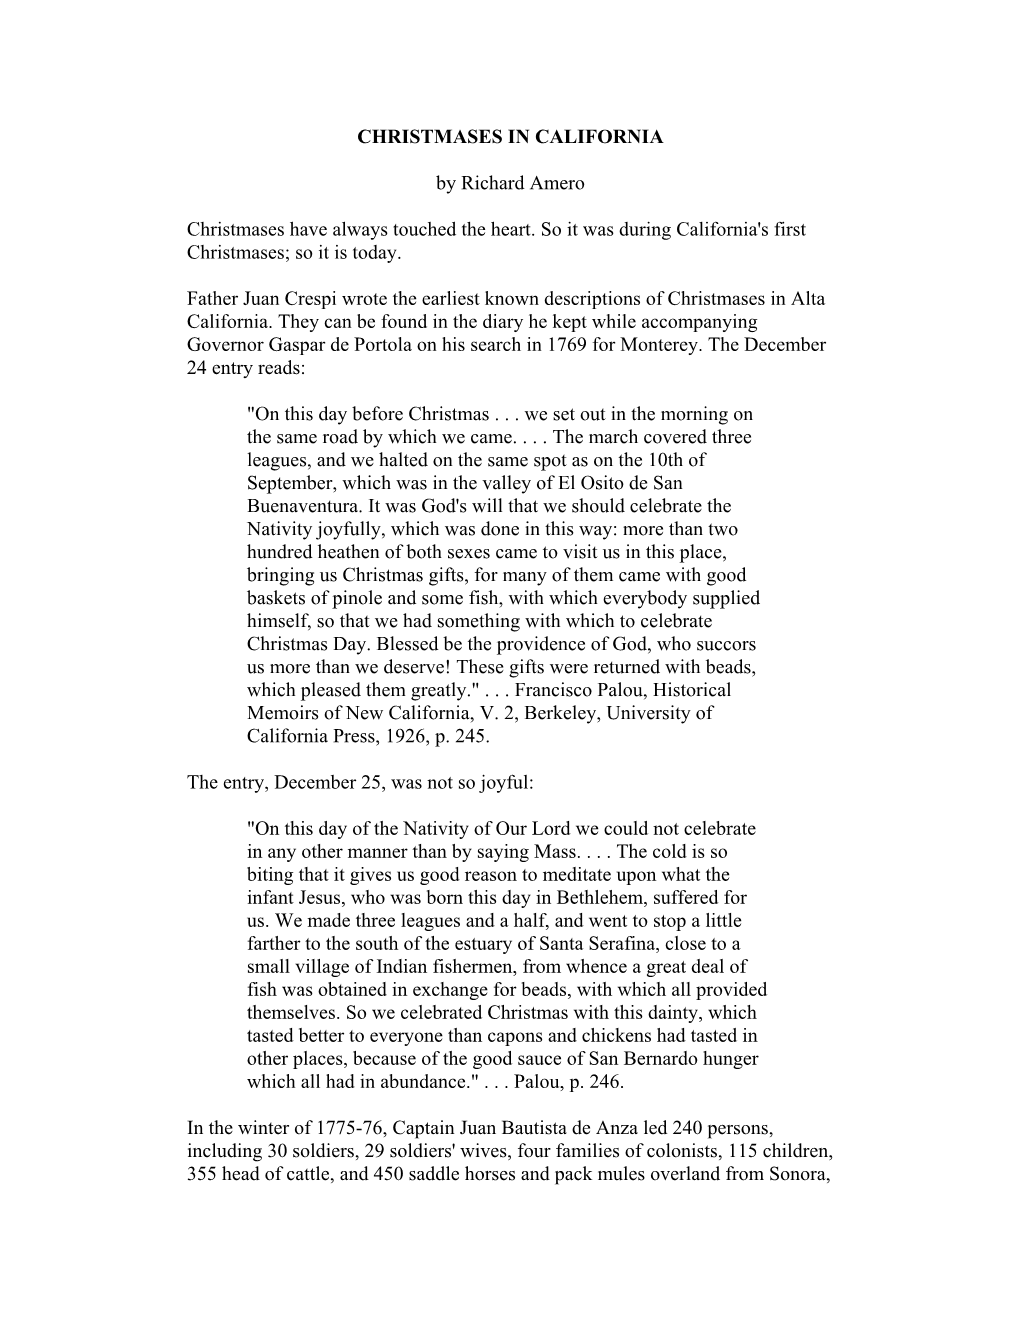 CHRISTMASES in CALIFORNIA by Richard Amero Christmases Have